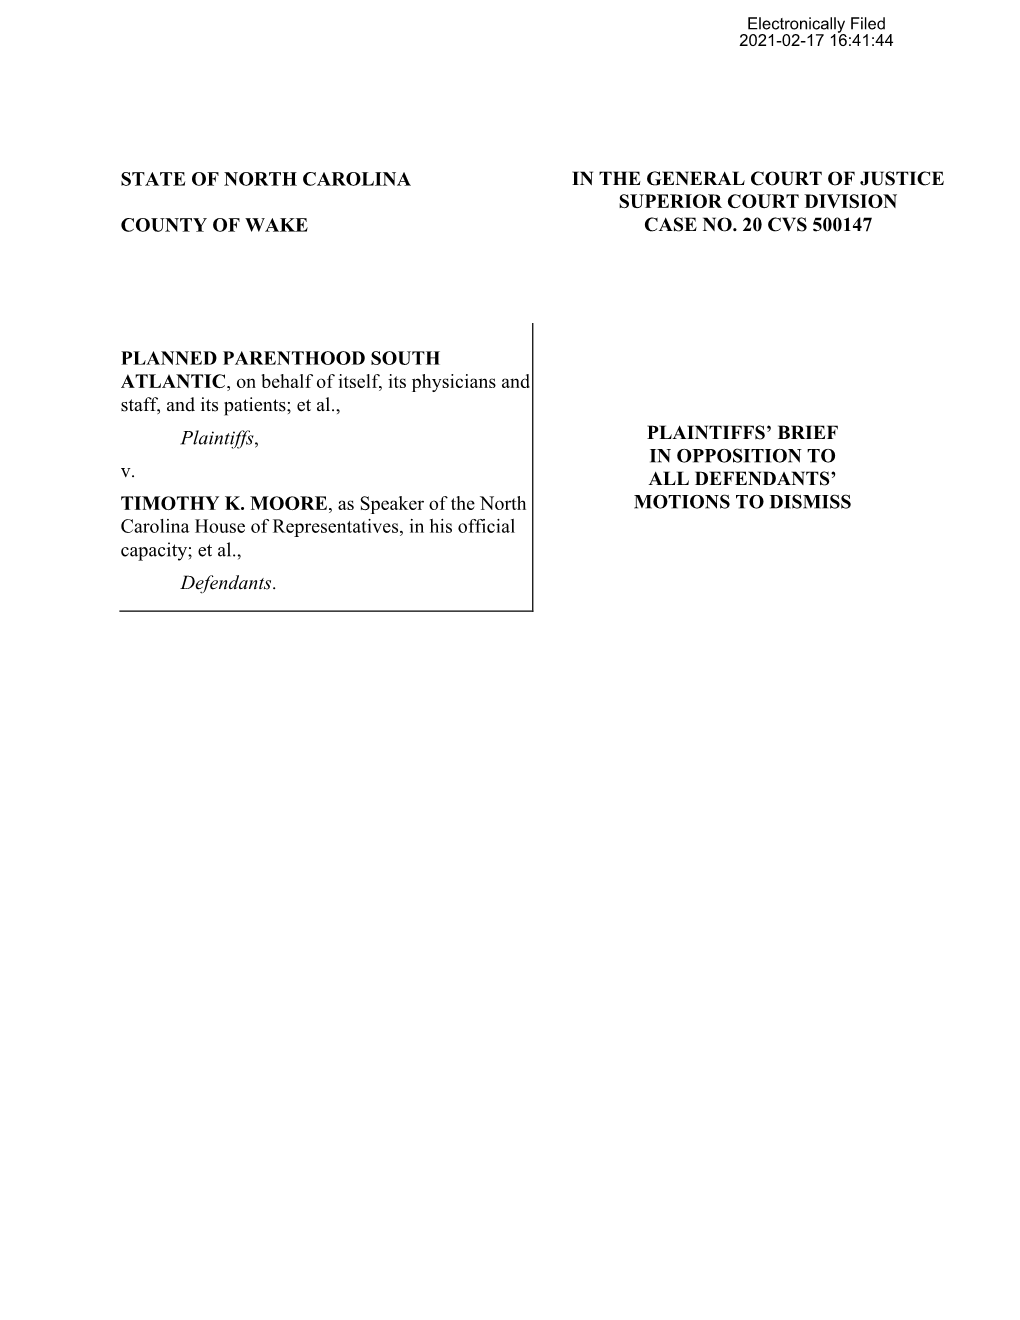 Plaintiffs' Brief in Response to All Defendants Motions to Dismiss